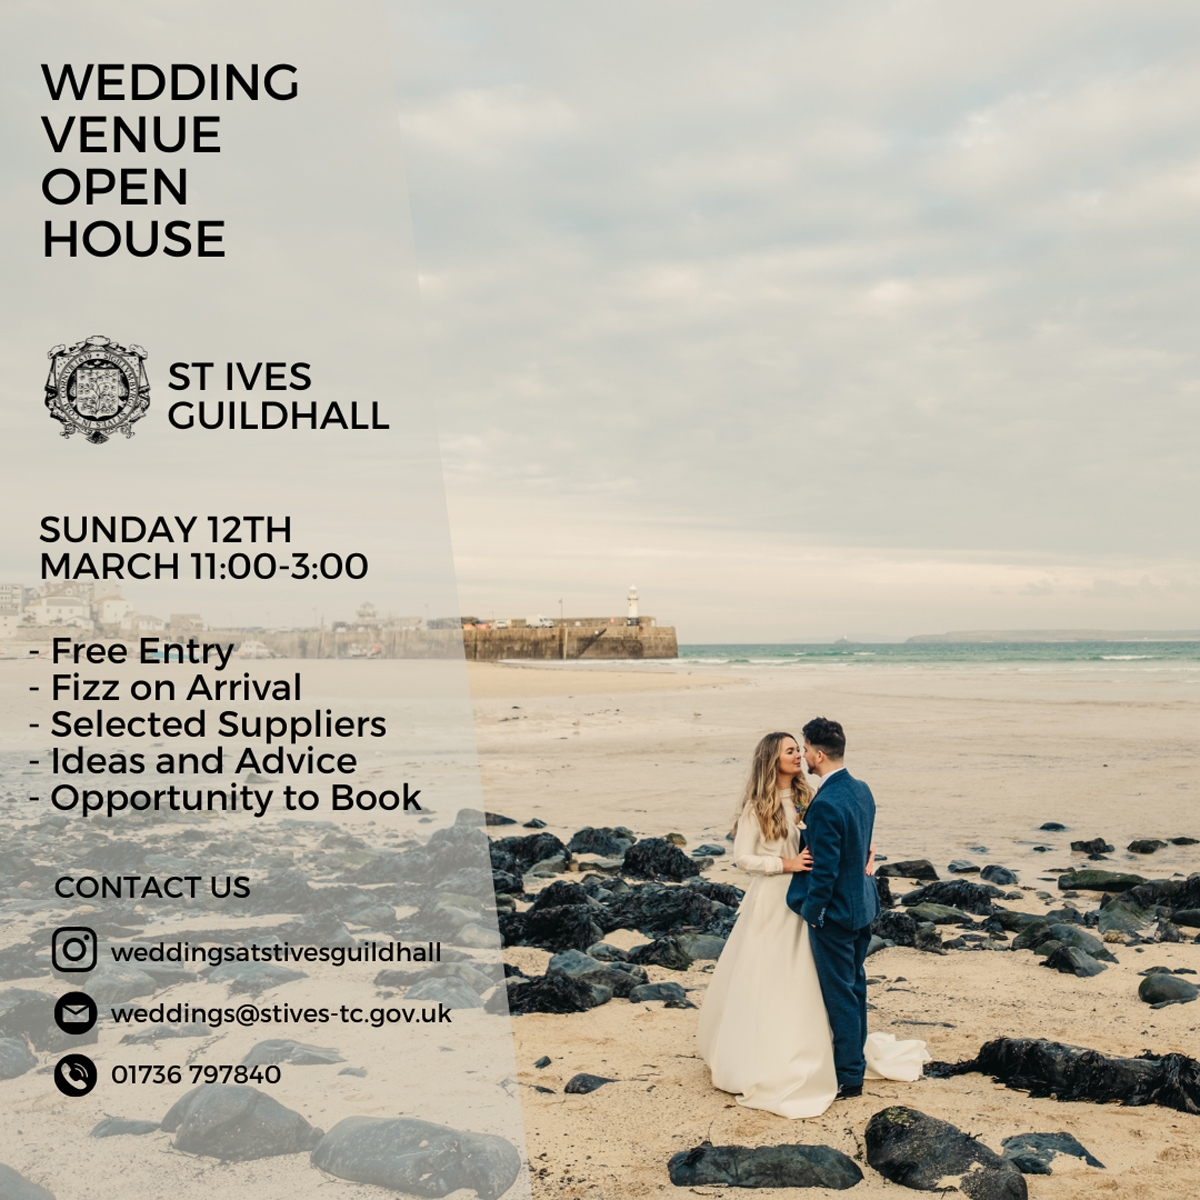 Wedding open house at St Ives Guildhall